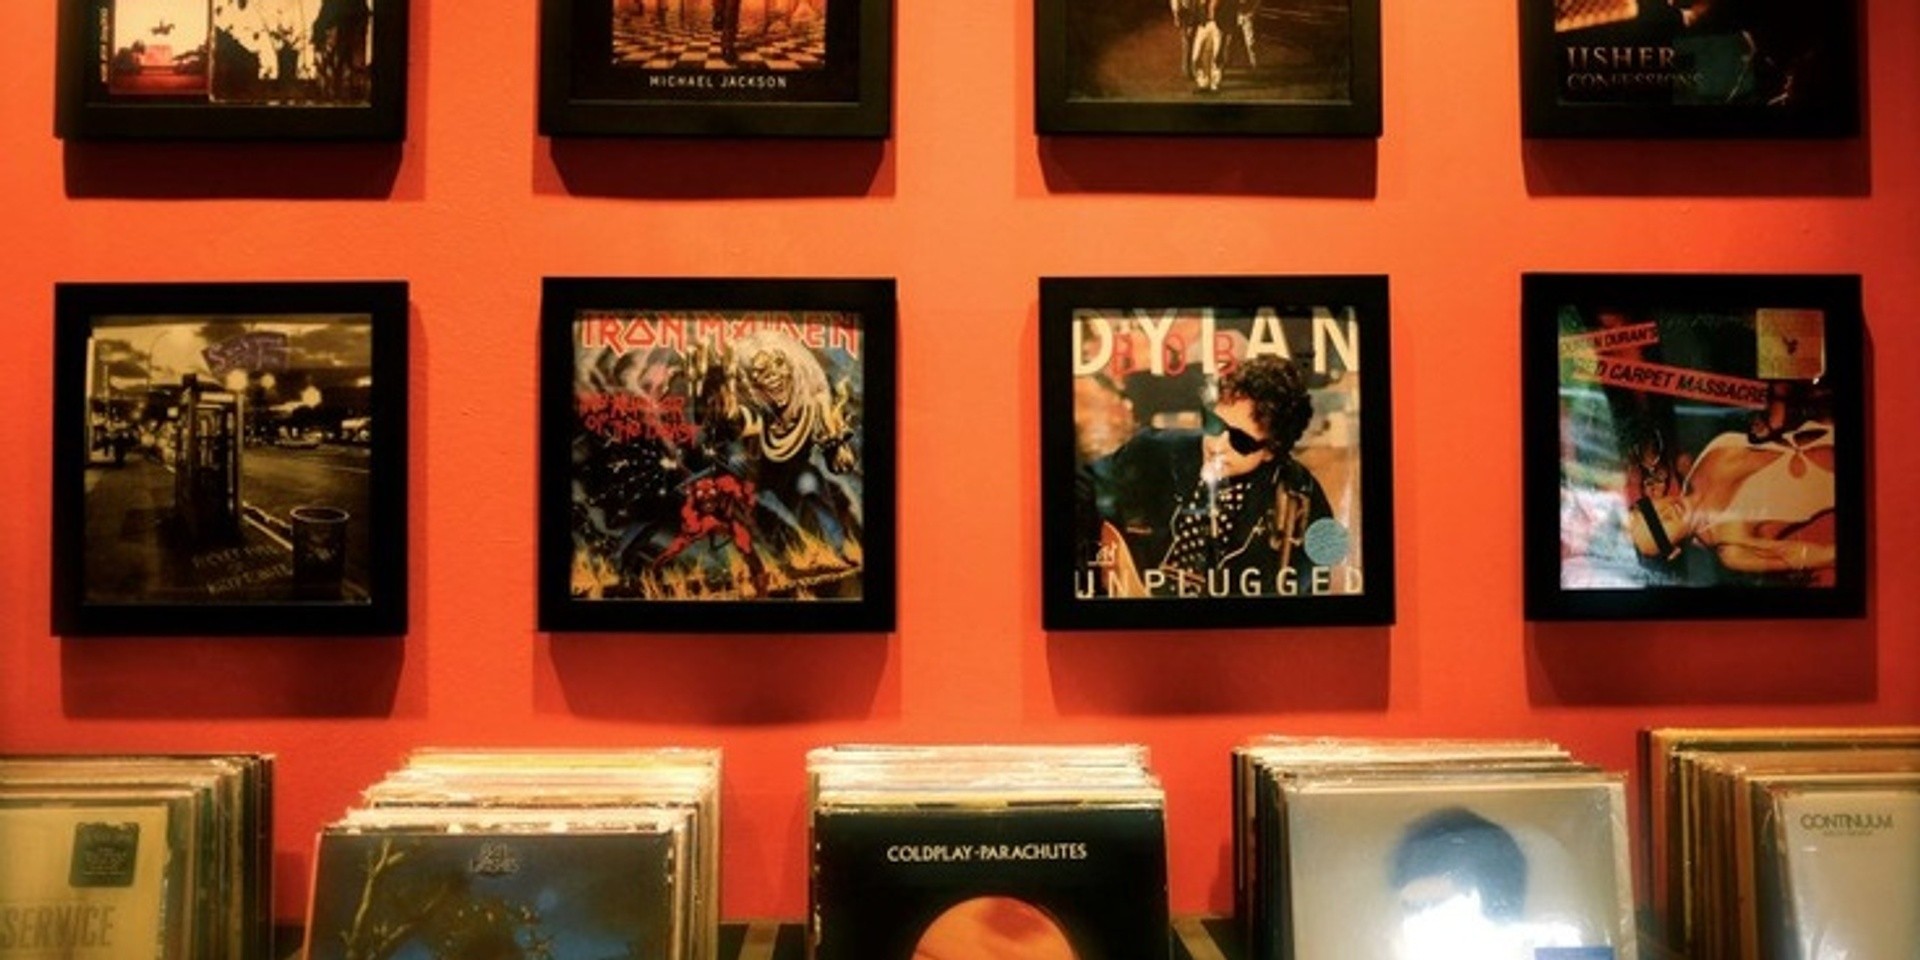 Singapore's Hear Records is now considered one of the "world's best record shops"